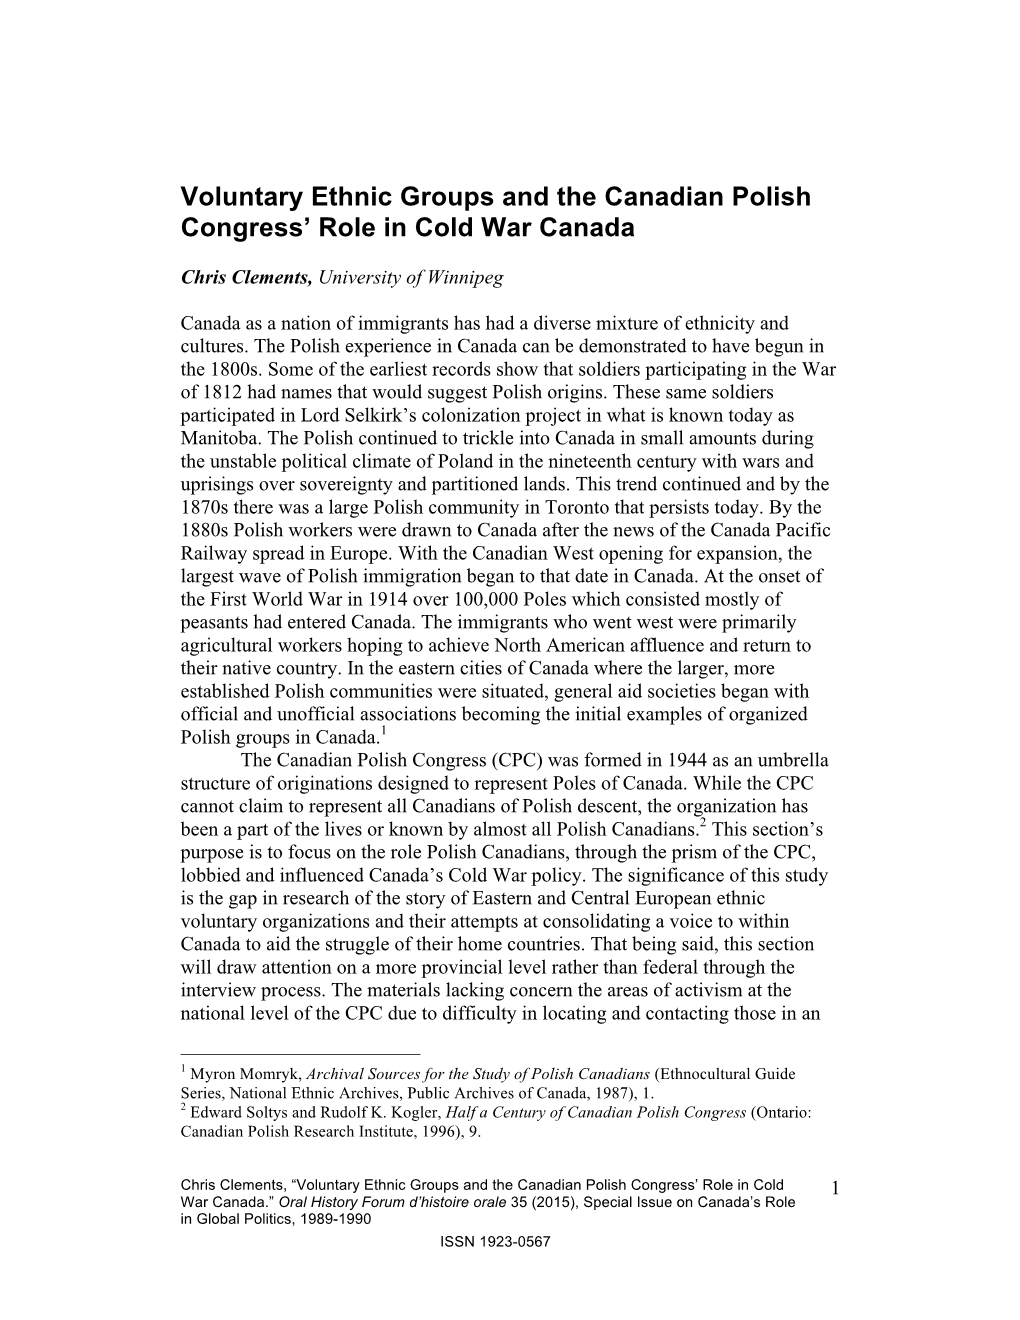 Voluntary Ethnic Groups and the Canadian Polish Congress' Role In